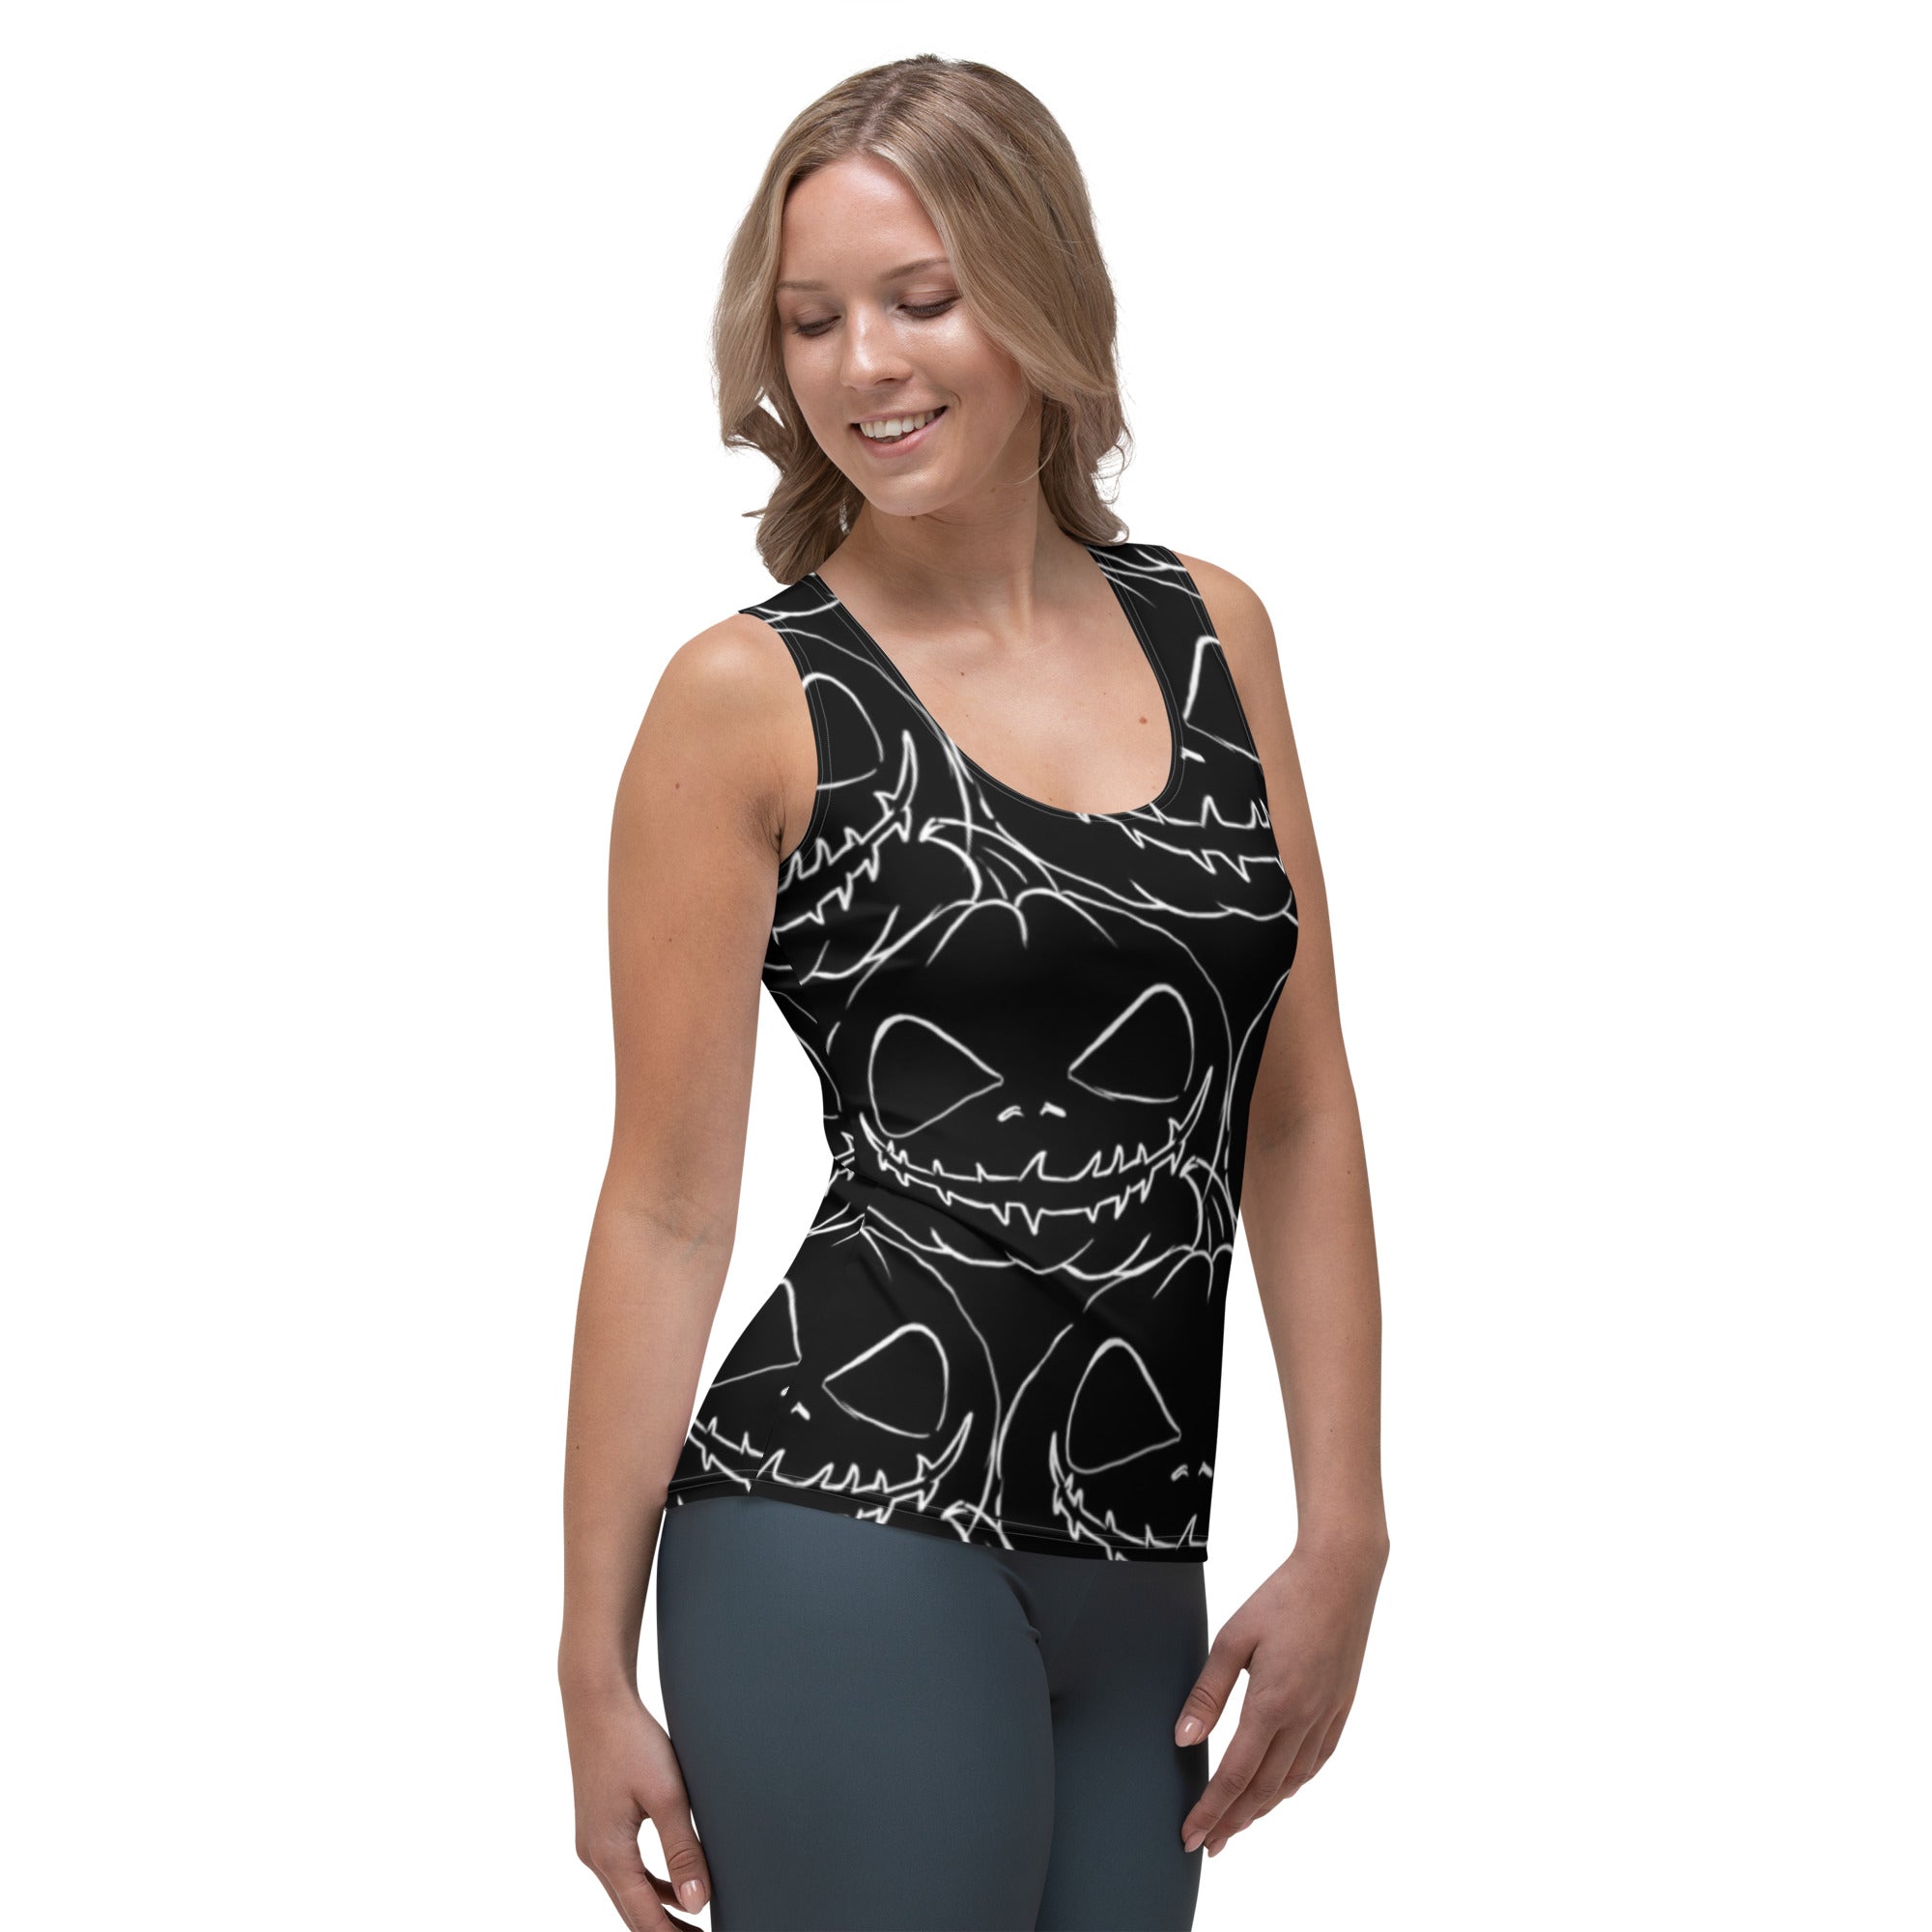 Halloween Edition Women Stretchy Tank for Workout, Gym, Yoga